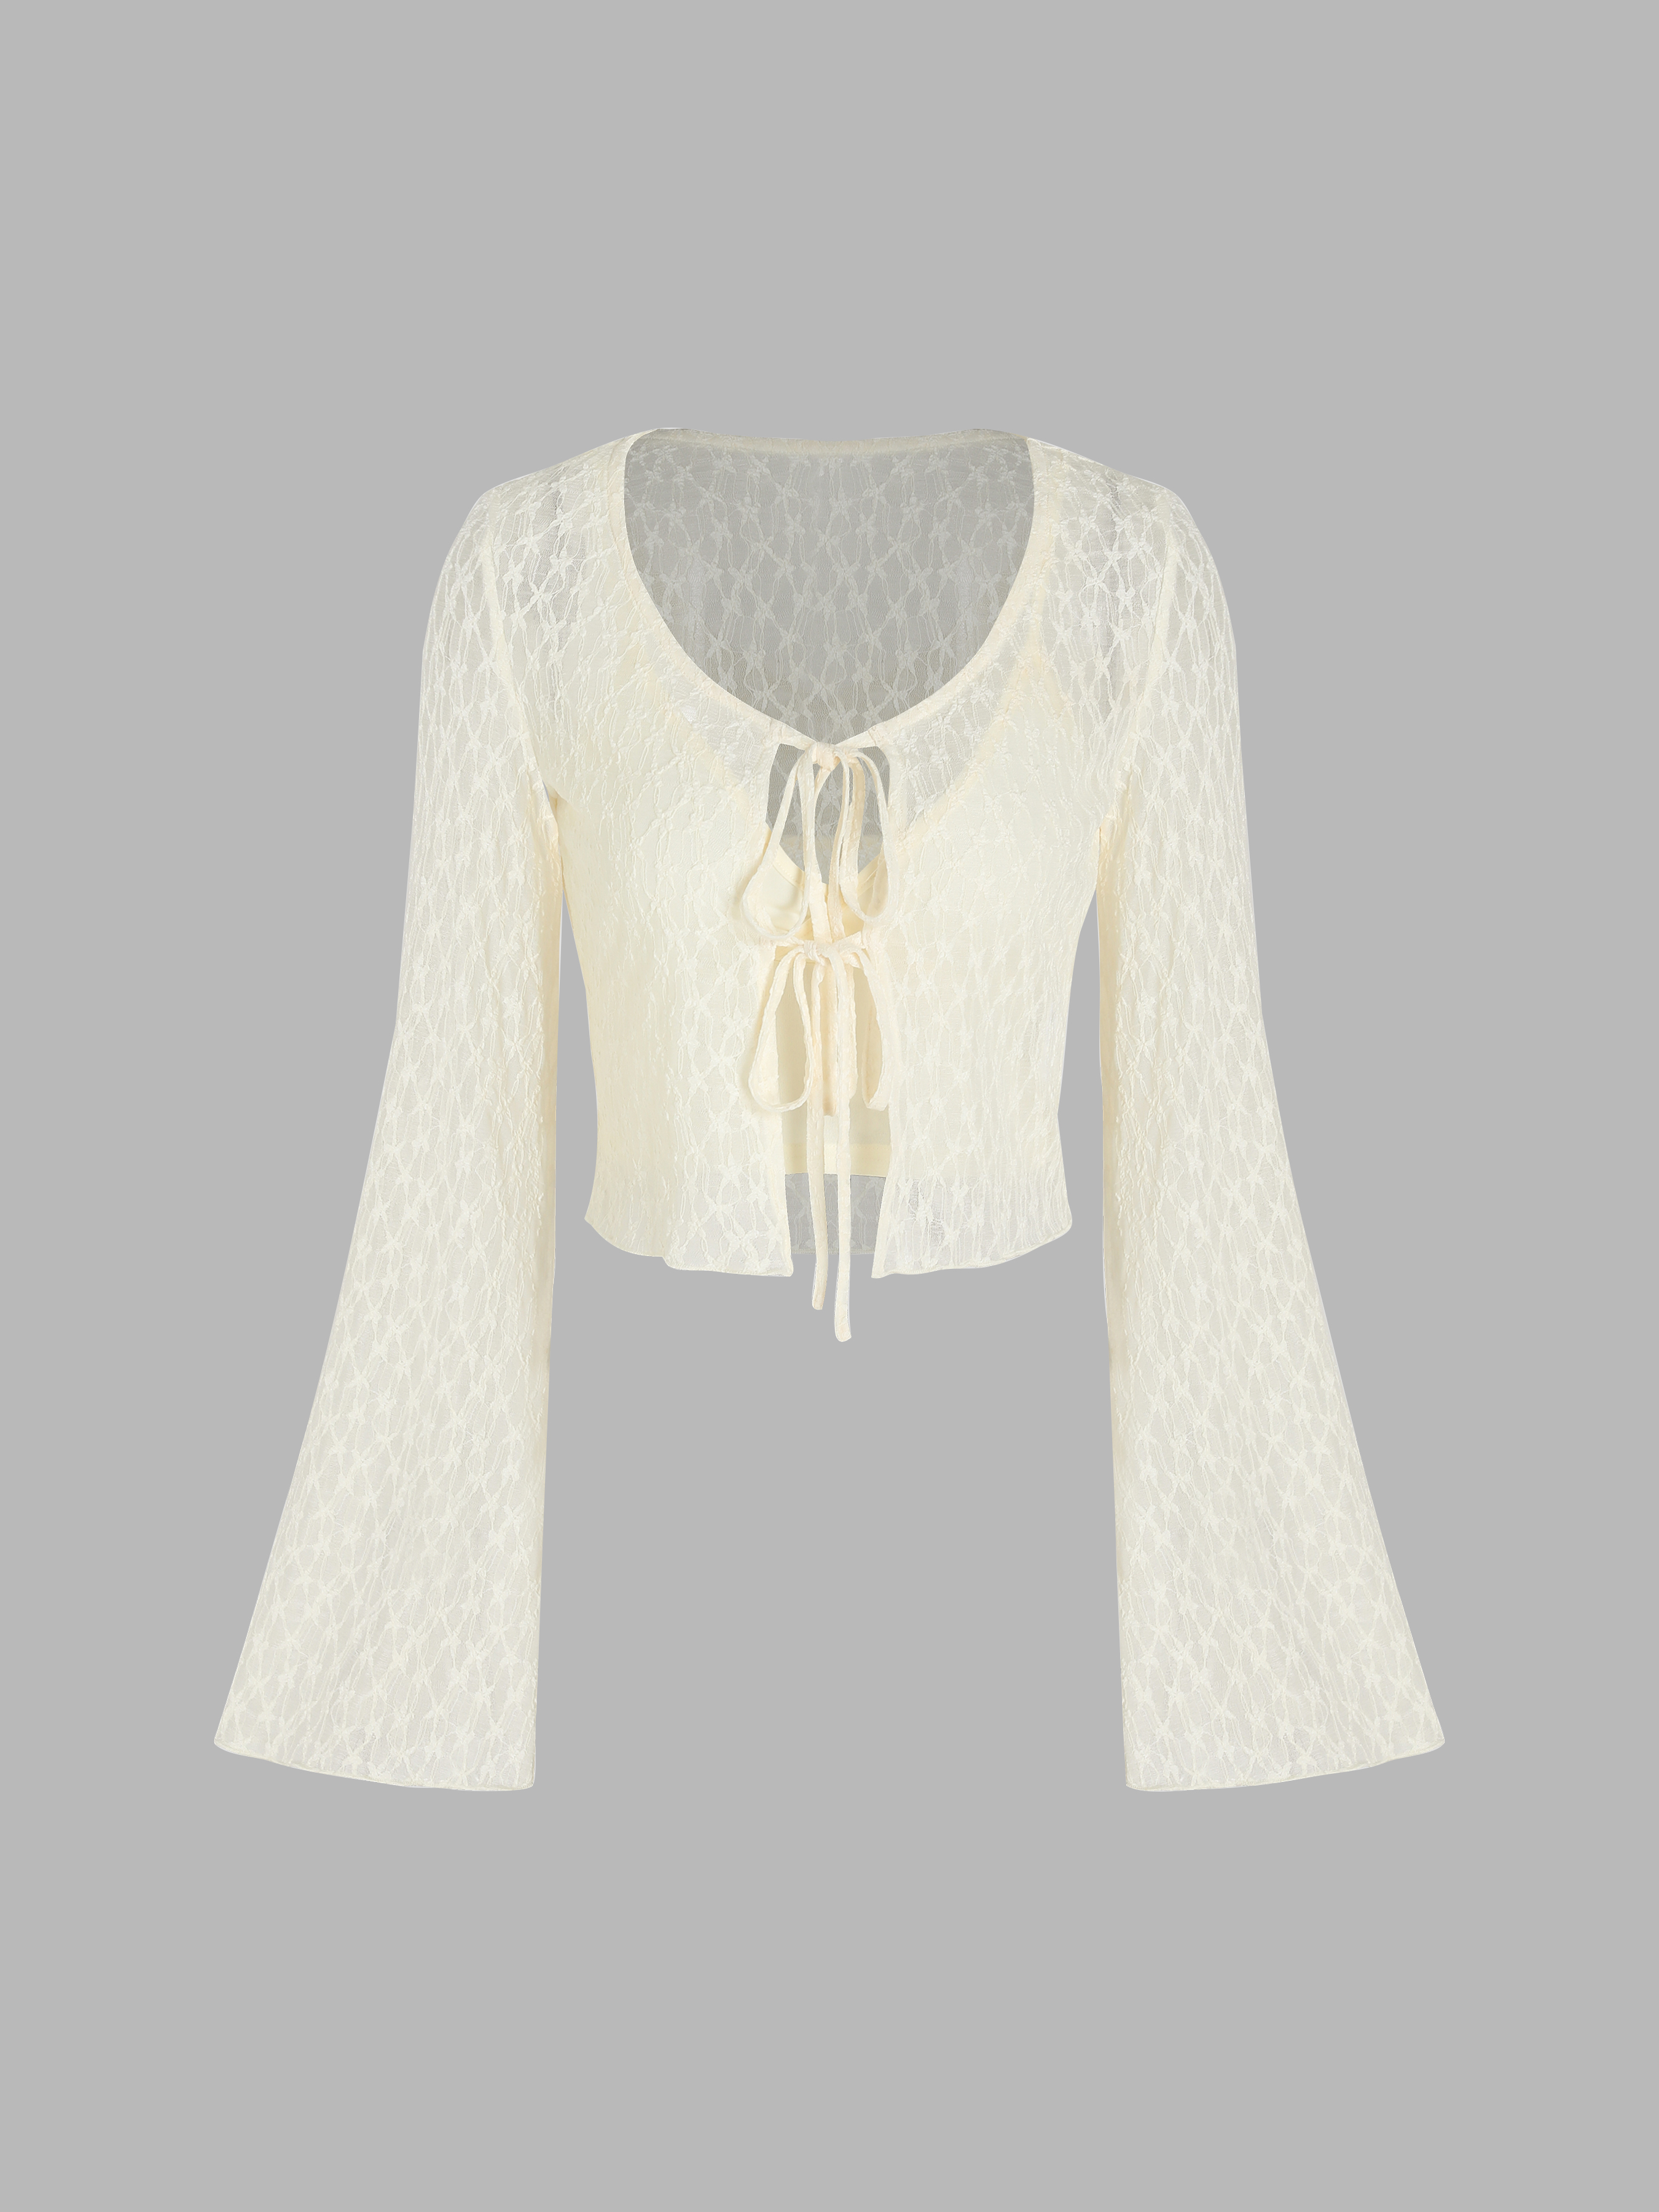 Solid Cami Crop Top & Bell Sleeve Lace Up Blouse - Cider